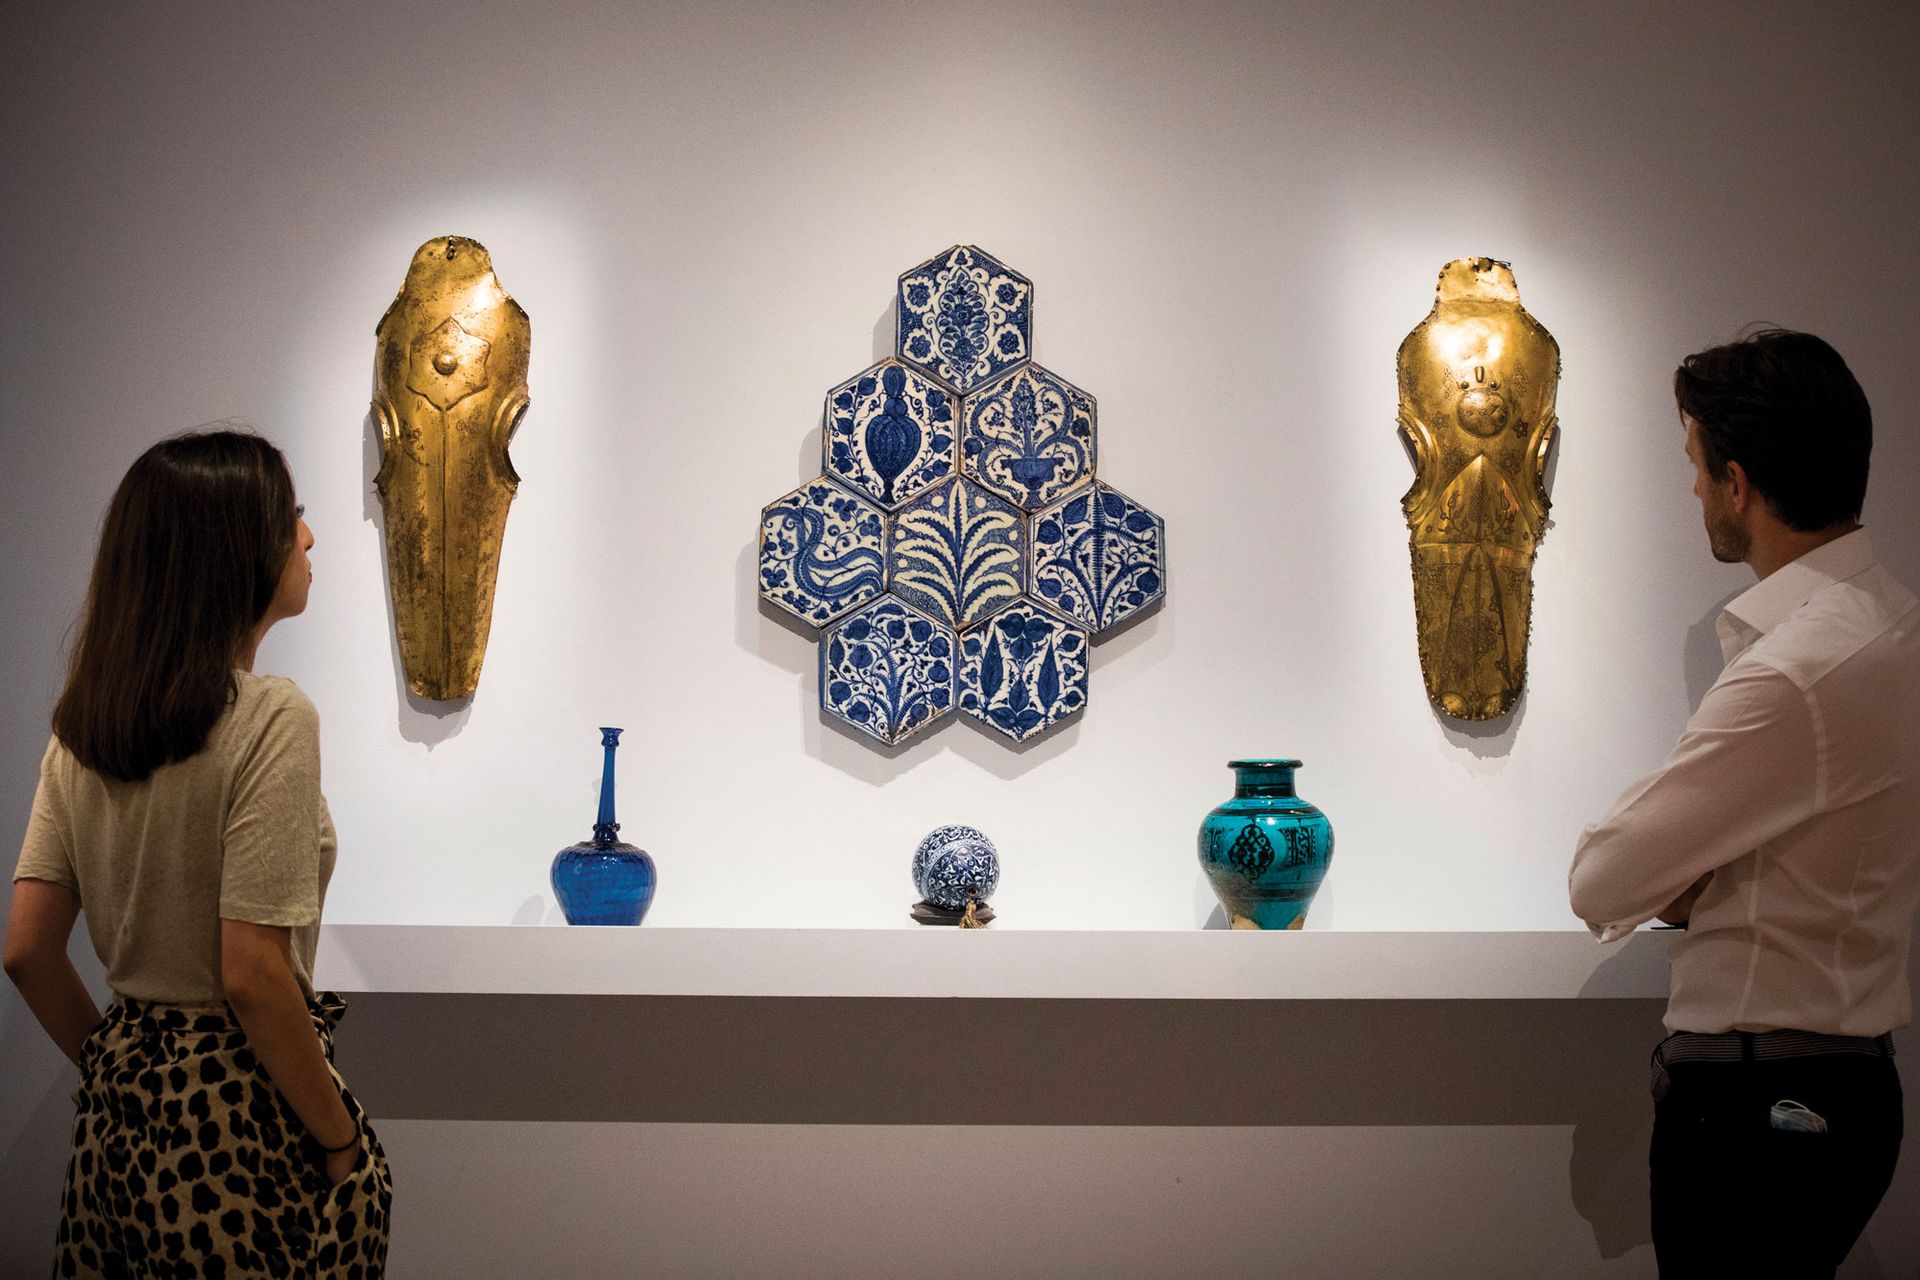 Israel's Museum for Islamic Art has consigned 258 works from its collection for auction at Sotheby's London on 27 and 28 October © Sotheby's